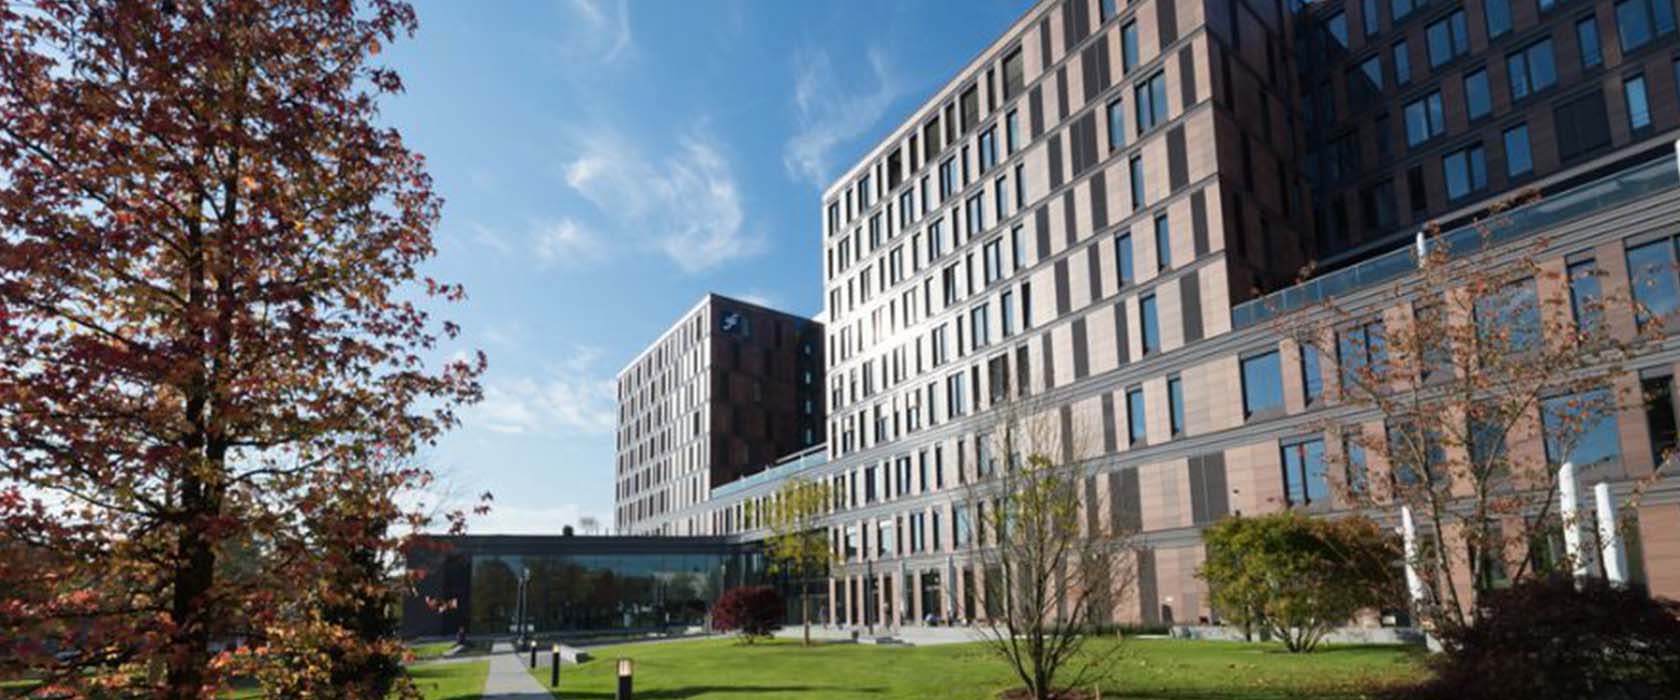 Call For Applications, 8 Fully-funded Ph.D. Fellowships Frankfurt School of Finance and Management